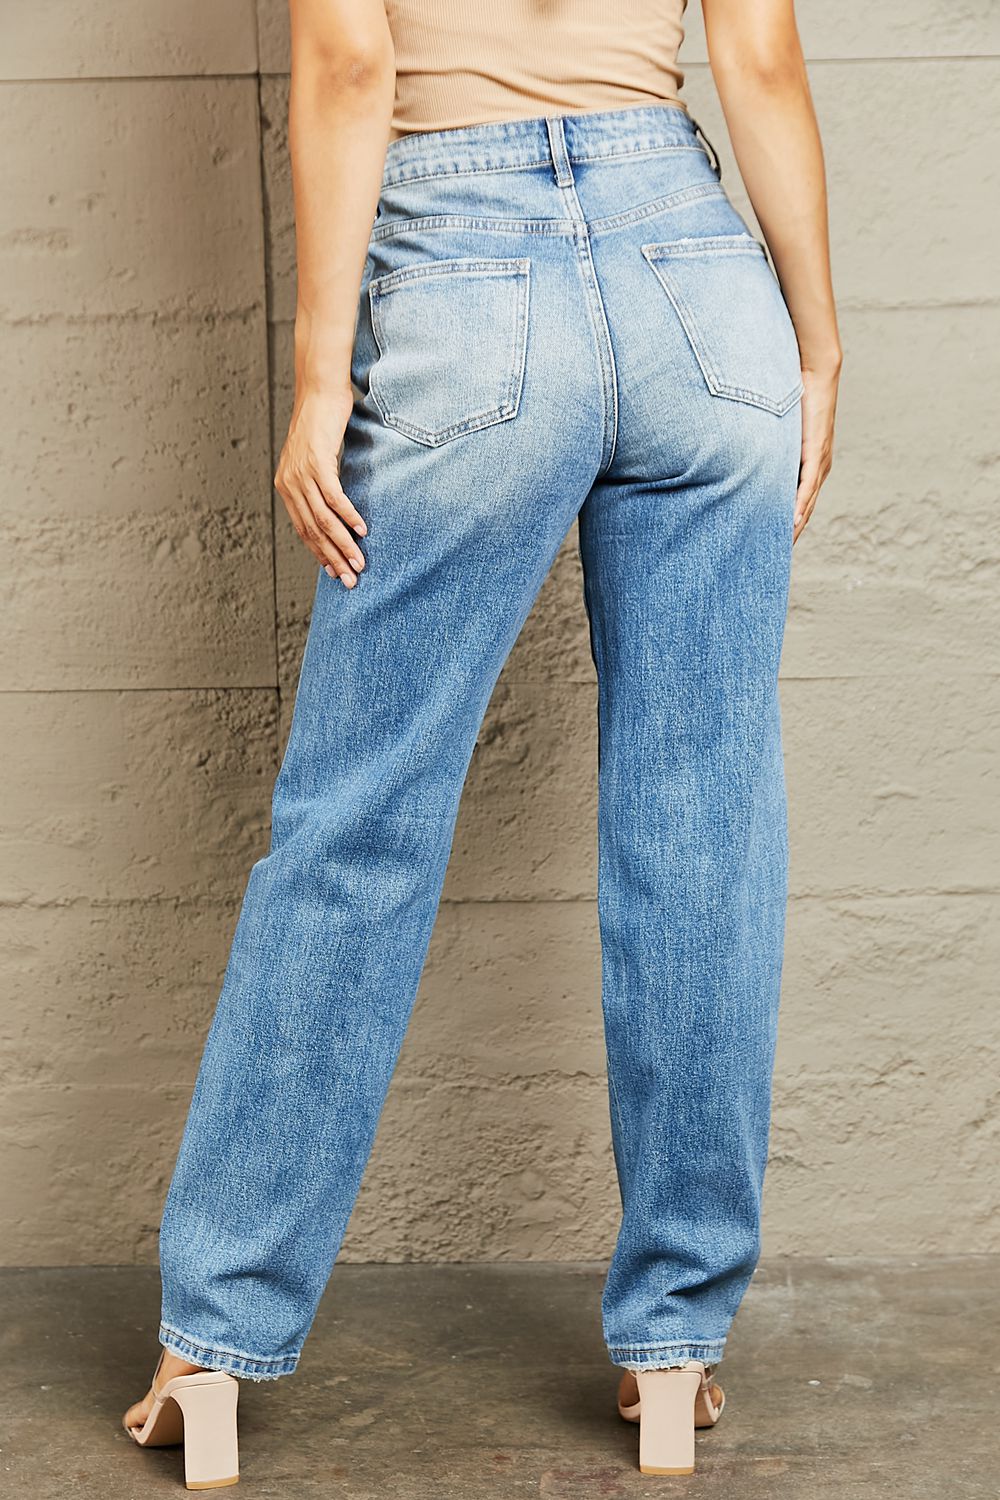 High Waisted Straight Jeans Pants